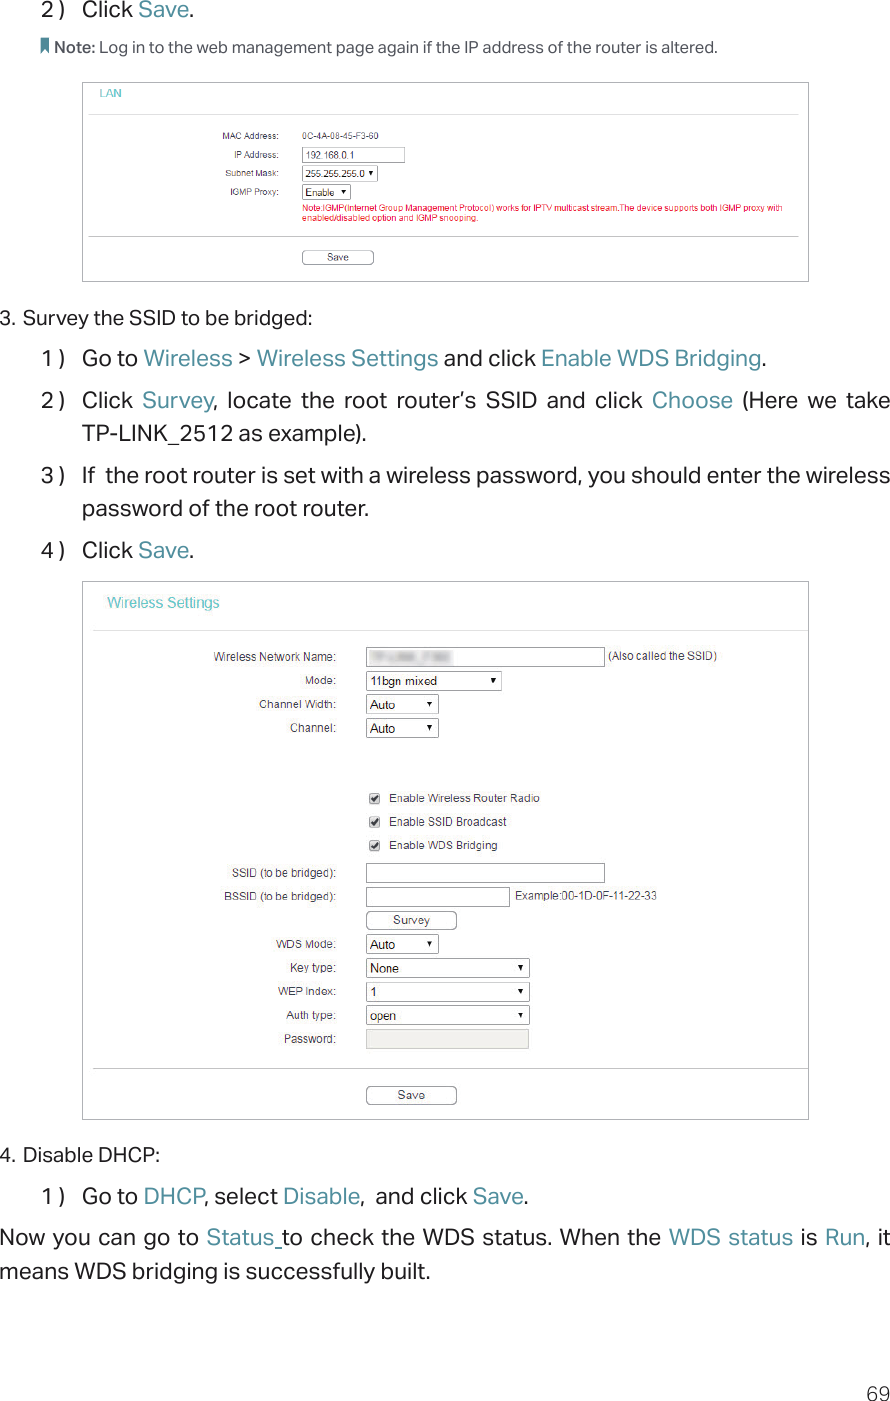 692 )  Click Save.Note: Log in to the web management page again if the IP address of the router is altered.3. Survey the SSID to be bridged:1 )  Go to Wireless &gt; Wireless Settings and click Enable WDS Bridging.2 )  Click  Survey, locate the root router’s SSID and click Choose  (Here we take  TP-LINK_2512 as example).3 )  If  the root router is set with a wireless password, you should enter the wireless password of the root router.4 )  Click Save.4. Disable DHCP:1 )  Go to DHCP, select Disable,  and click Save.Now you can go to Status to check the WDS status. When the WDS status is Run, it means WDS bridging is successfully built.